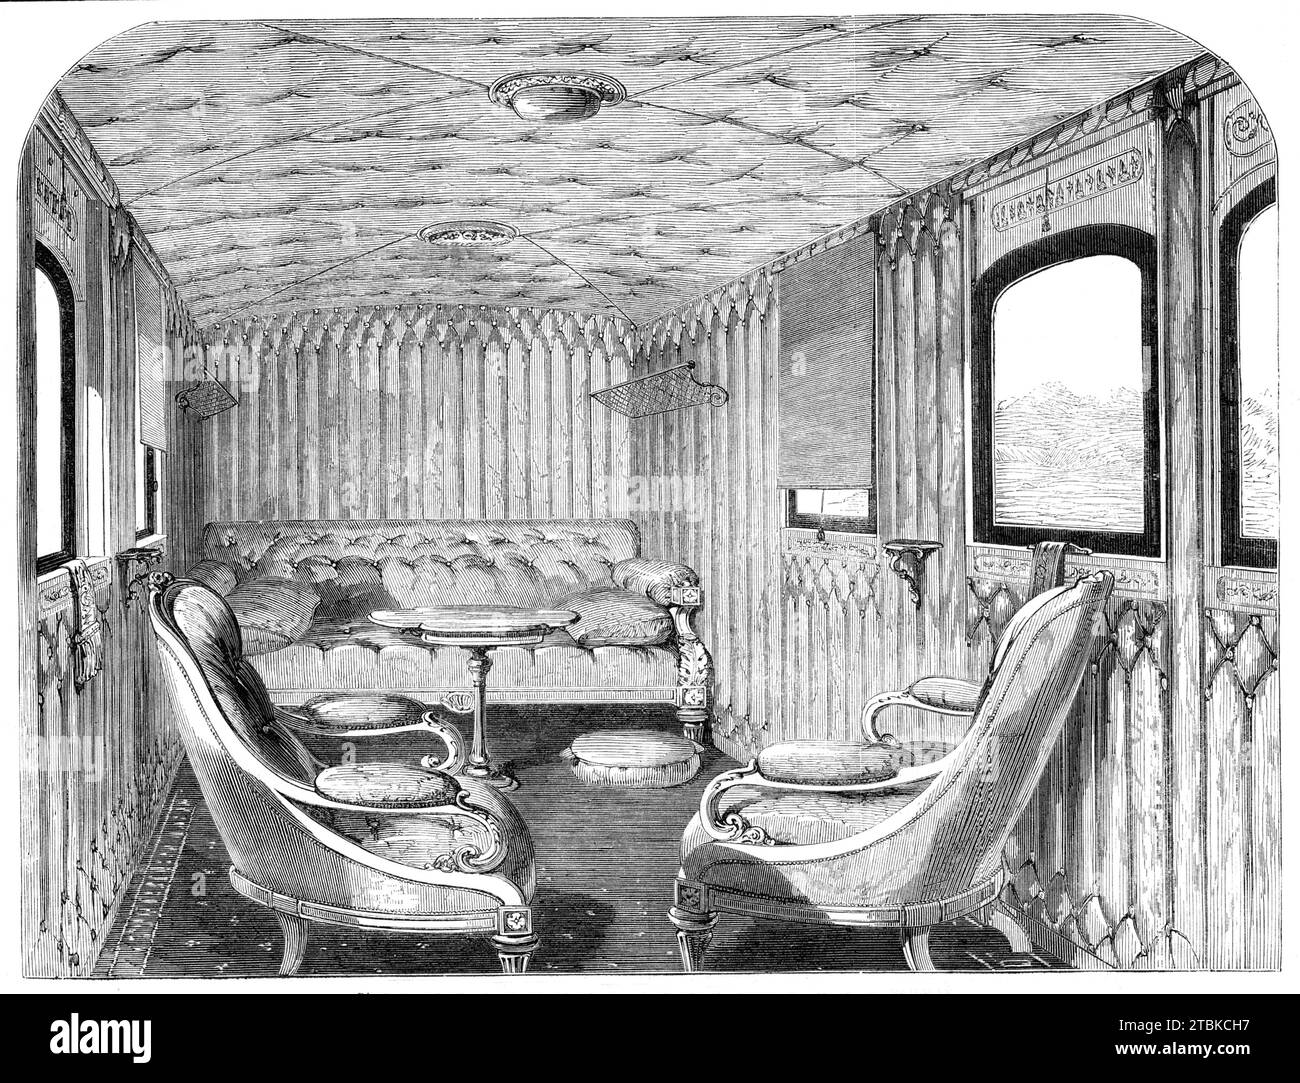 Saloon of Her Majesty's carriage on the London and North-Western Railway, 1861. 'State carriage...constructed expressly for the use of [Queen Victoria], the Prince Consort, and suite, the cost of which, it is stated, exceeded &#xa3;3000. The design of this magnificent specimen of railway carriage architecture was in the main prepared by and carried out under the direction of Mr. Cawkwell, the general manager, and Mr. H. P, Bruyeres, the general superintendent of the London and North-Western Railway...The interior of the Royal saloon presents a coup d'oeil combining the most refined taste and e Stock Photo